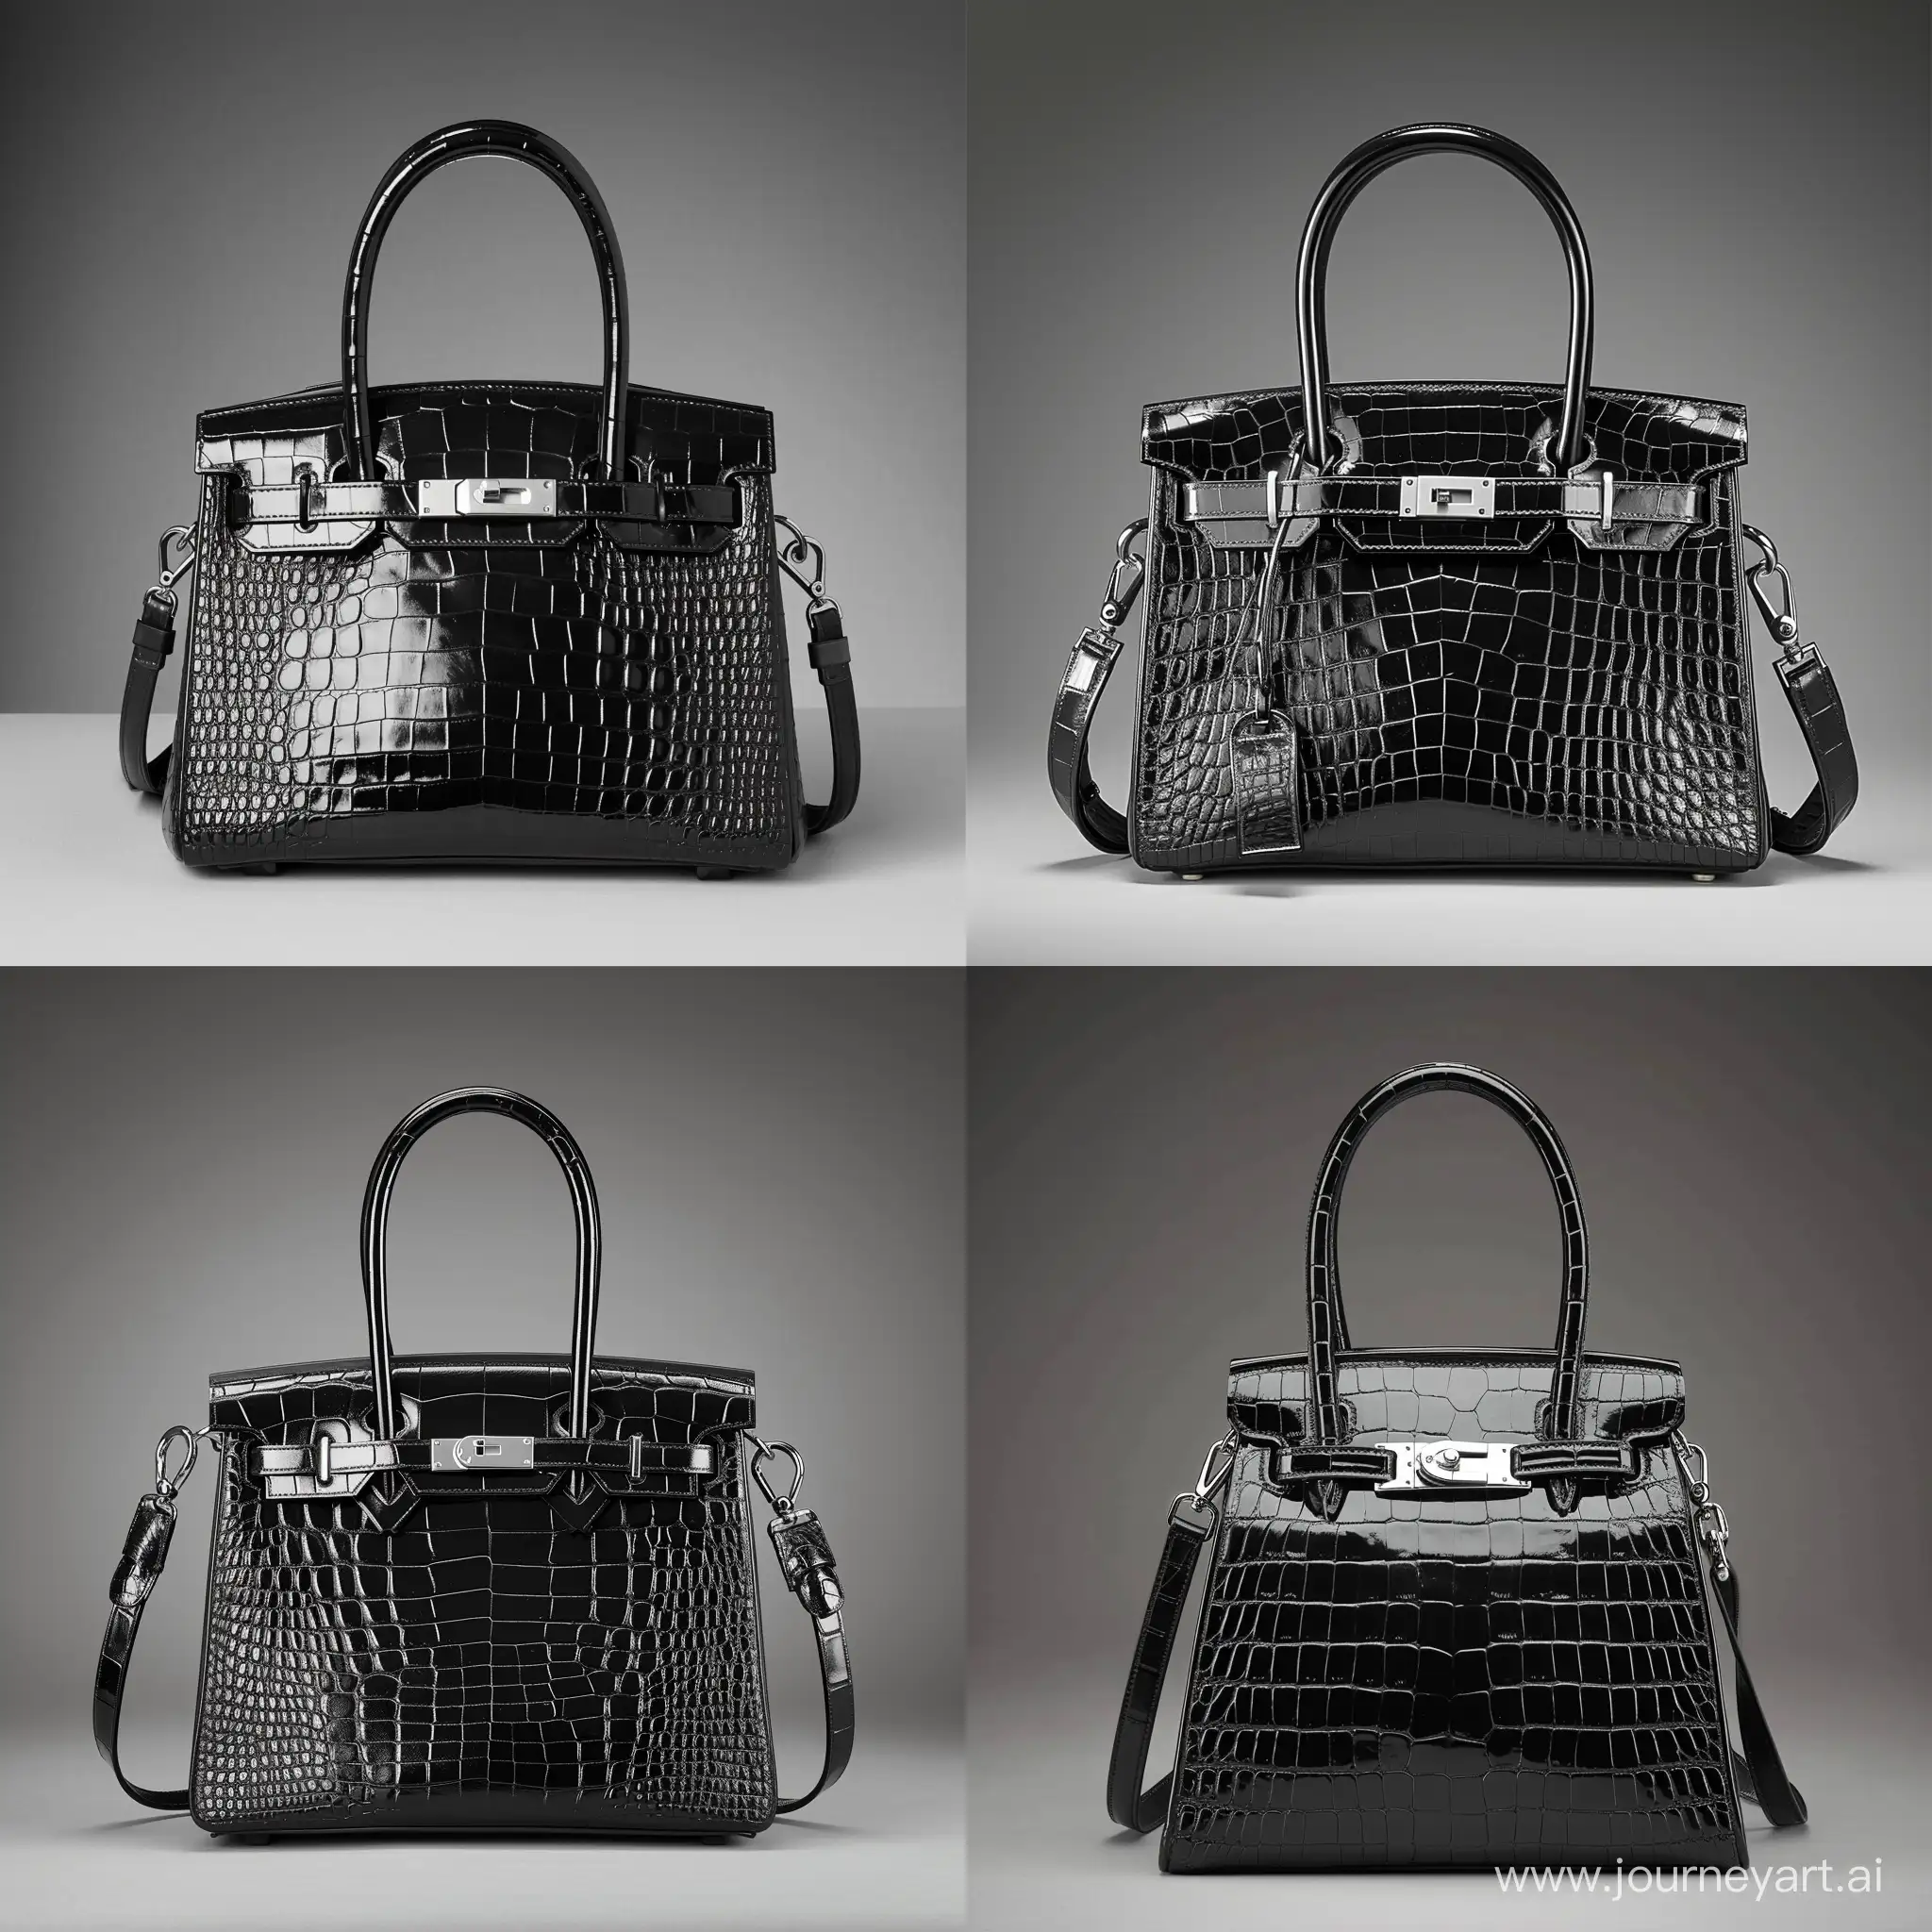 a bright black handbag with a crocodile skin pattern. The handbag has two small handles and a longer strap, and a metallic clasp in the front. It is photographed against a grey background